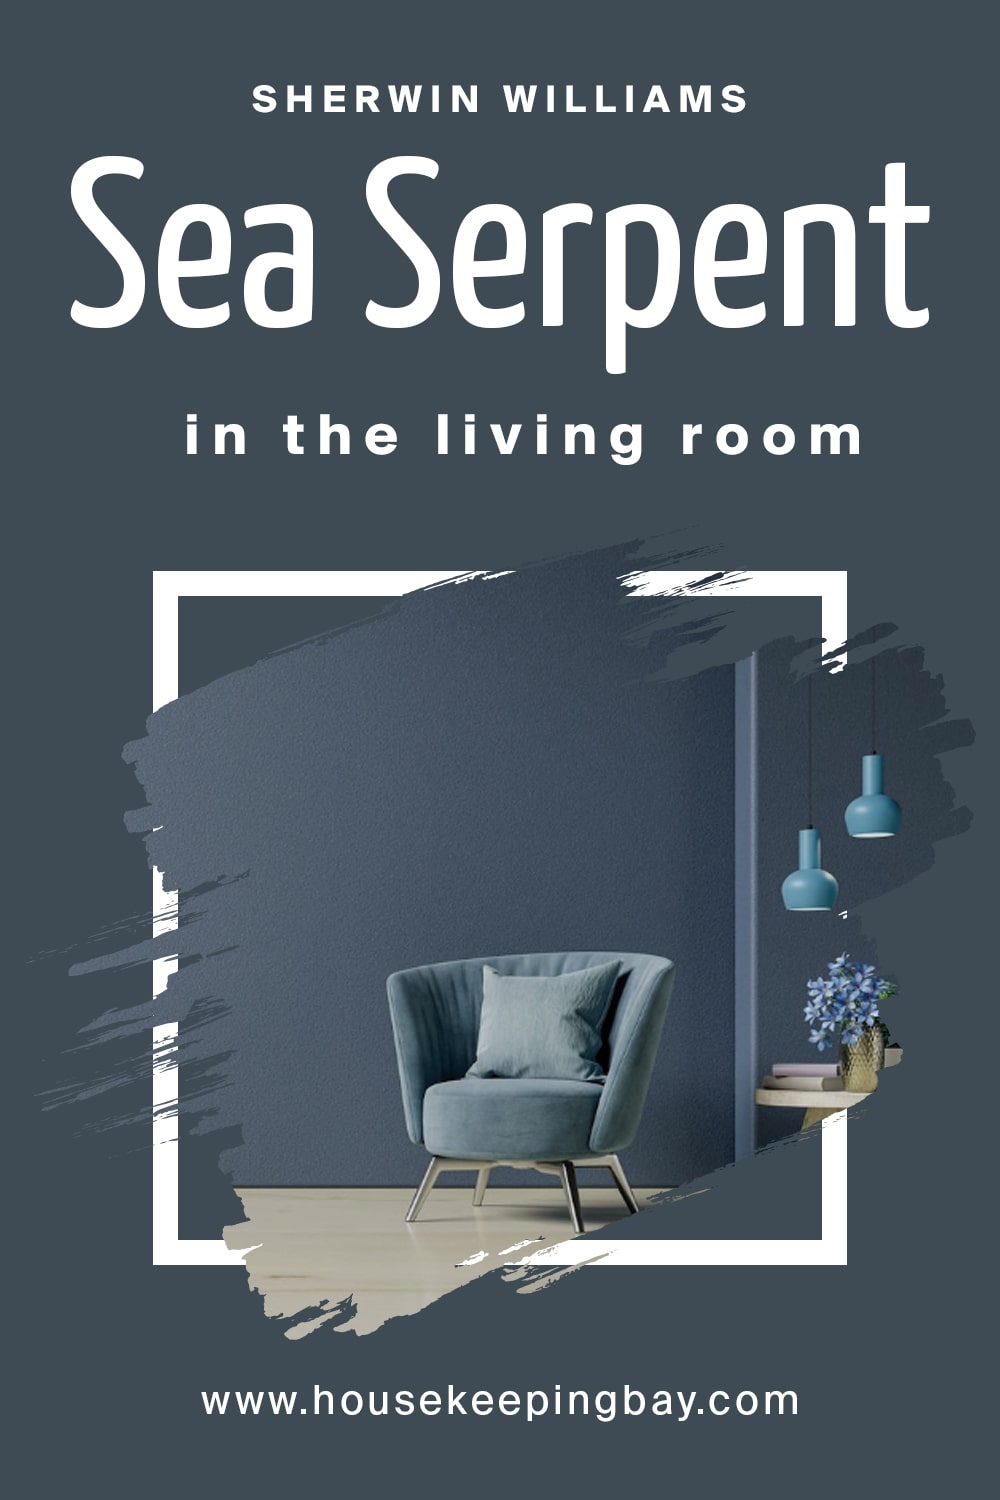 Sherwin Williams. Sea Serpent In the Living Room